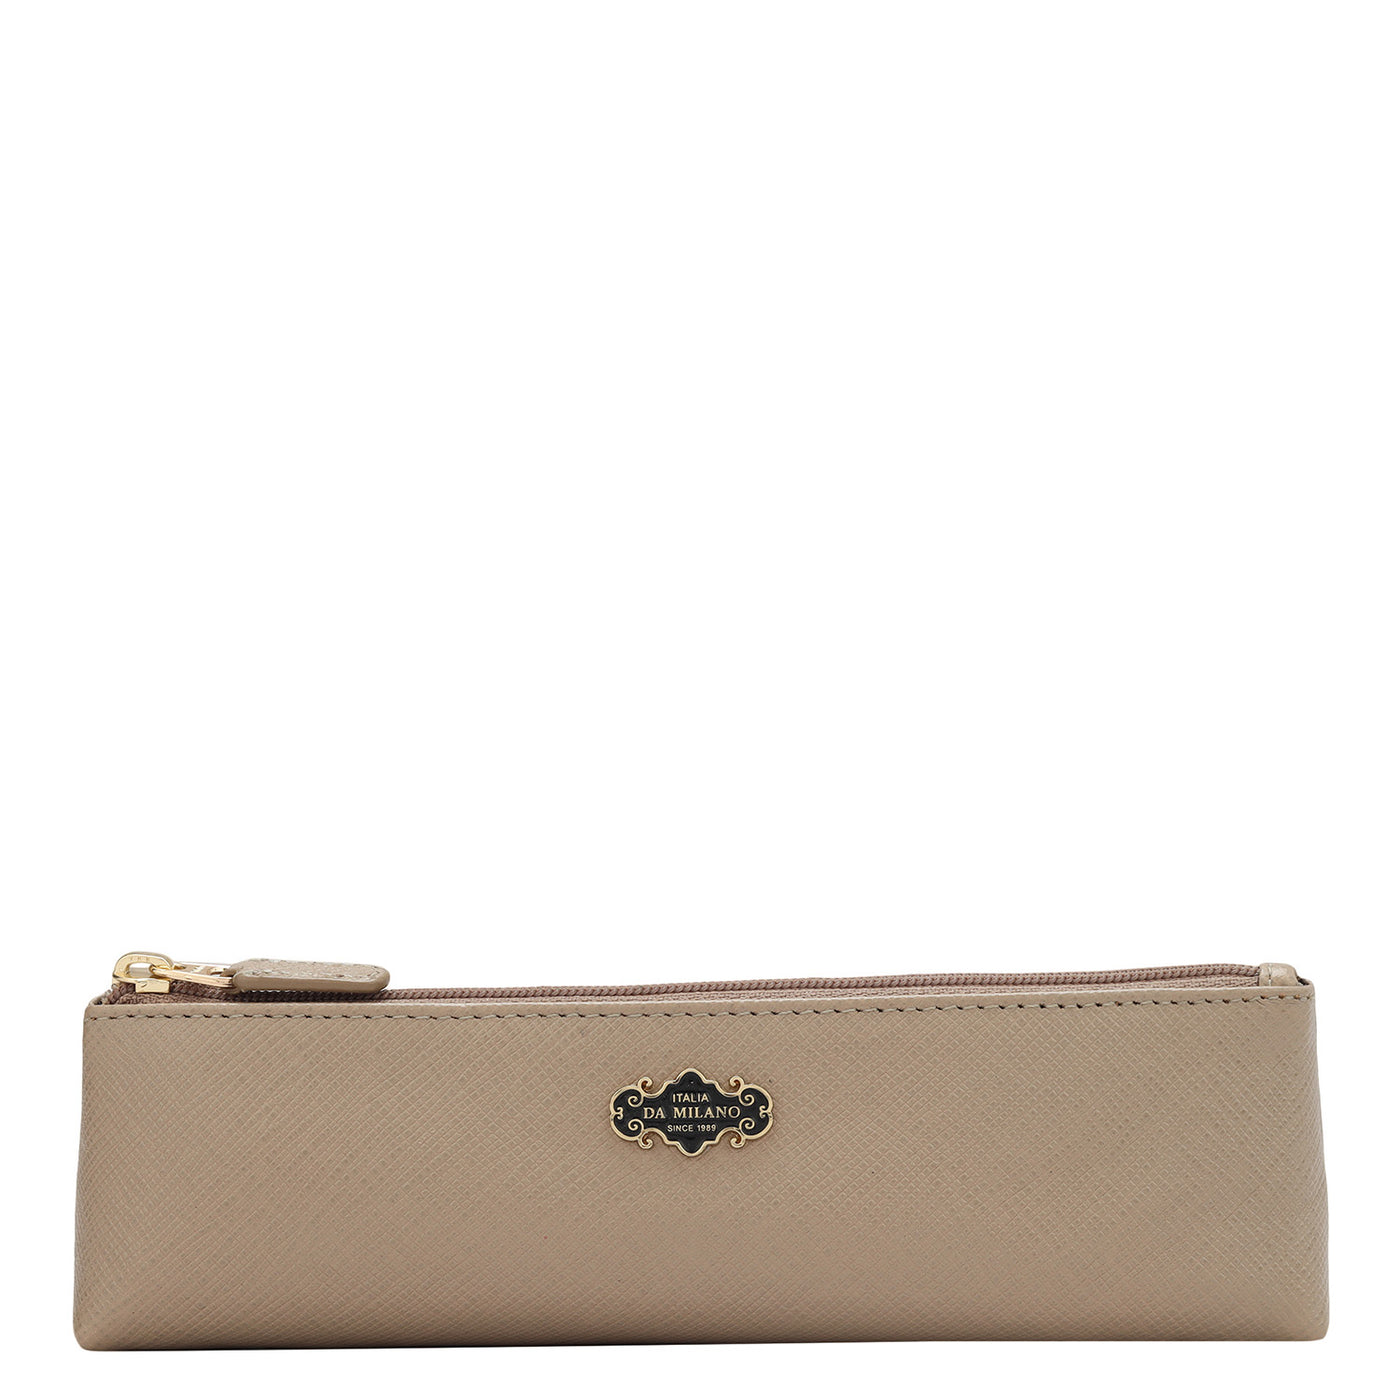 Saffiano Leather Multi Pouch - Ivory